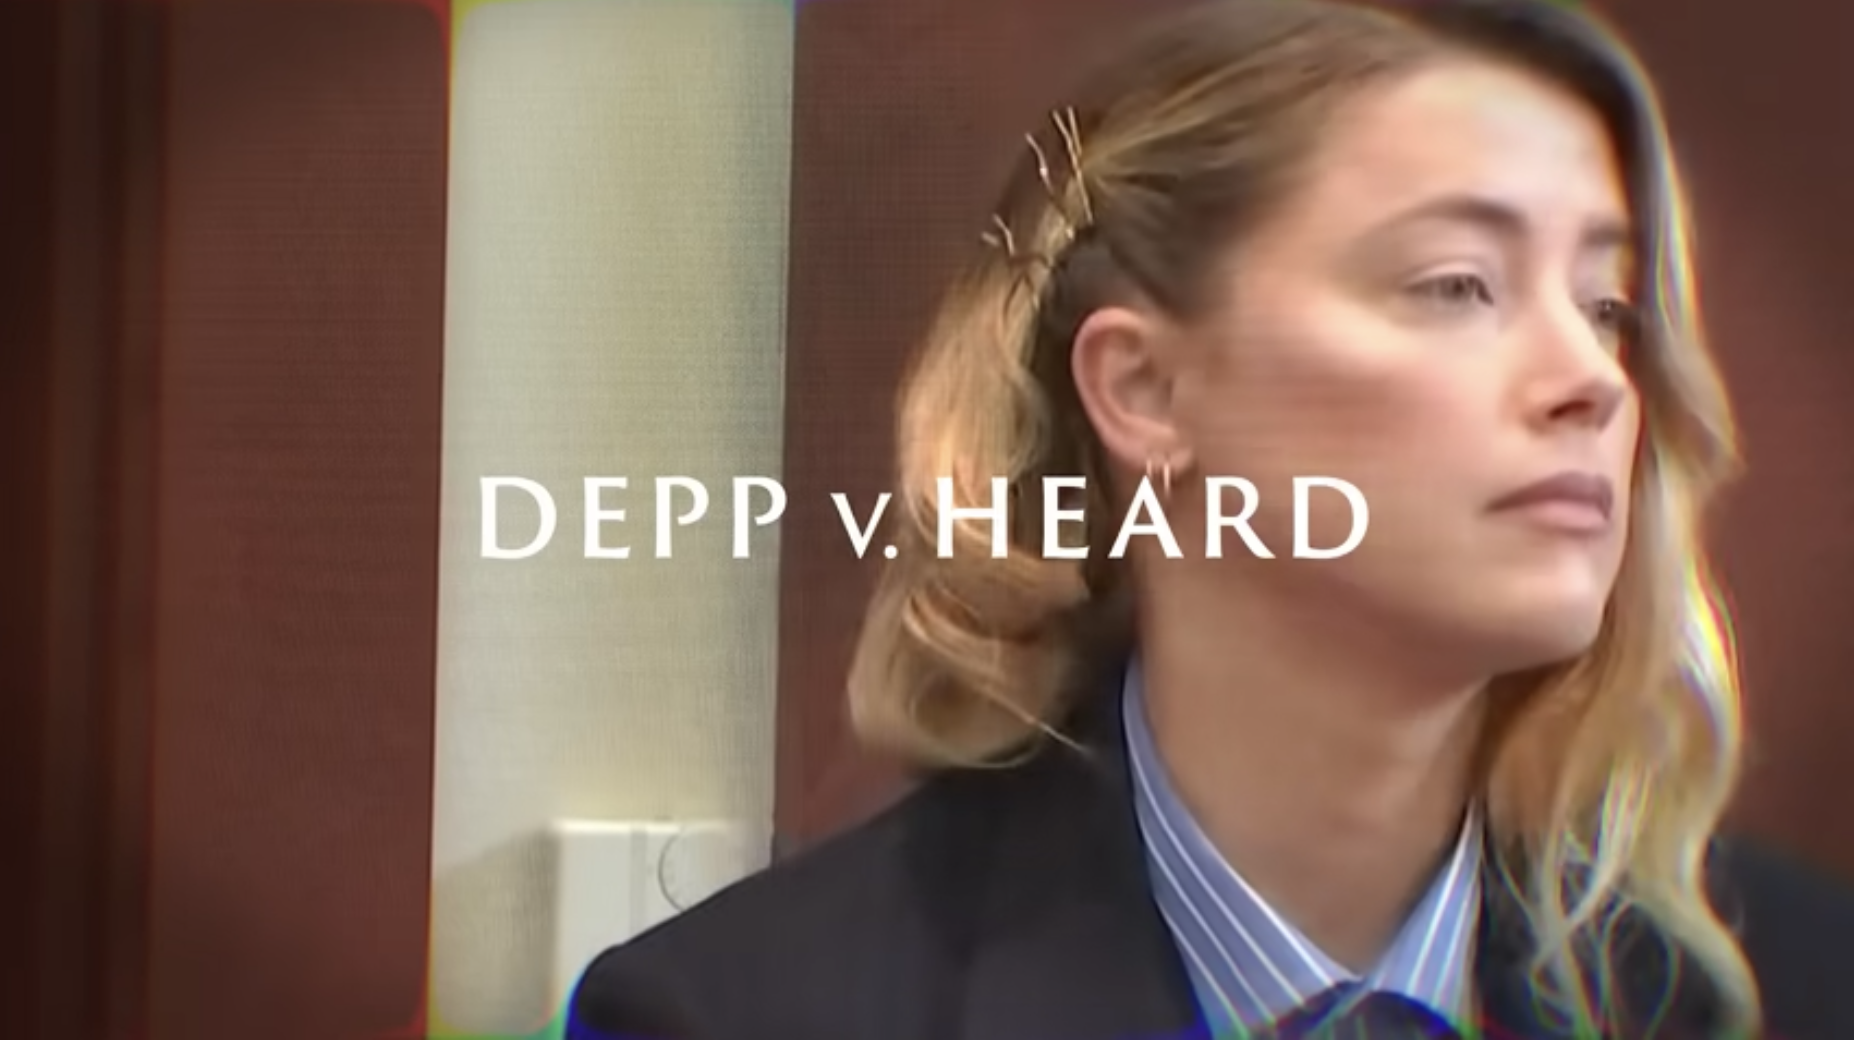 Johnny Depp, Amber Heard and the deeply unsatisfying matter of re-litigating their trial Johnny Depp, Amber Heard and the deeply unsatisfying matter of re-litigating their trial picture picture